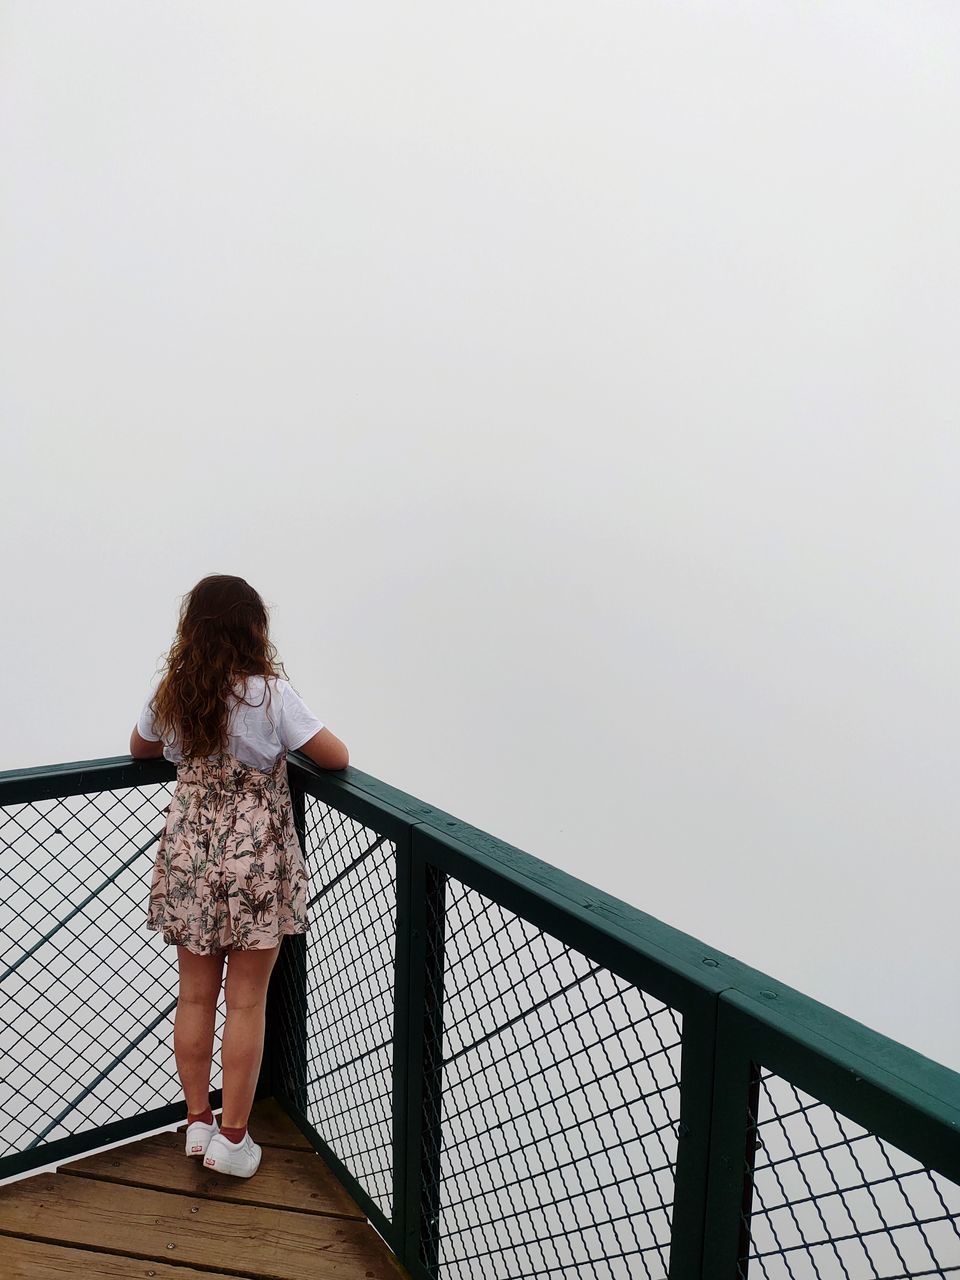 one person, full length, women, railing, copy space, rear view, standing, hairstyle, casual clothing, leisure activity, lifestyles, adult, sky, architecture, nature, child, female, long hair, childhood, looking, day, brown hair, built structure, young adult, outdoors, looking at view, spring, footwear, solitude, blue, dress, clothing, person